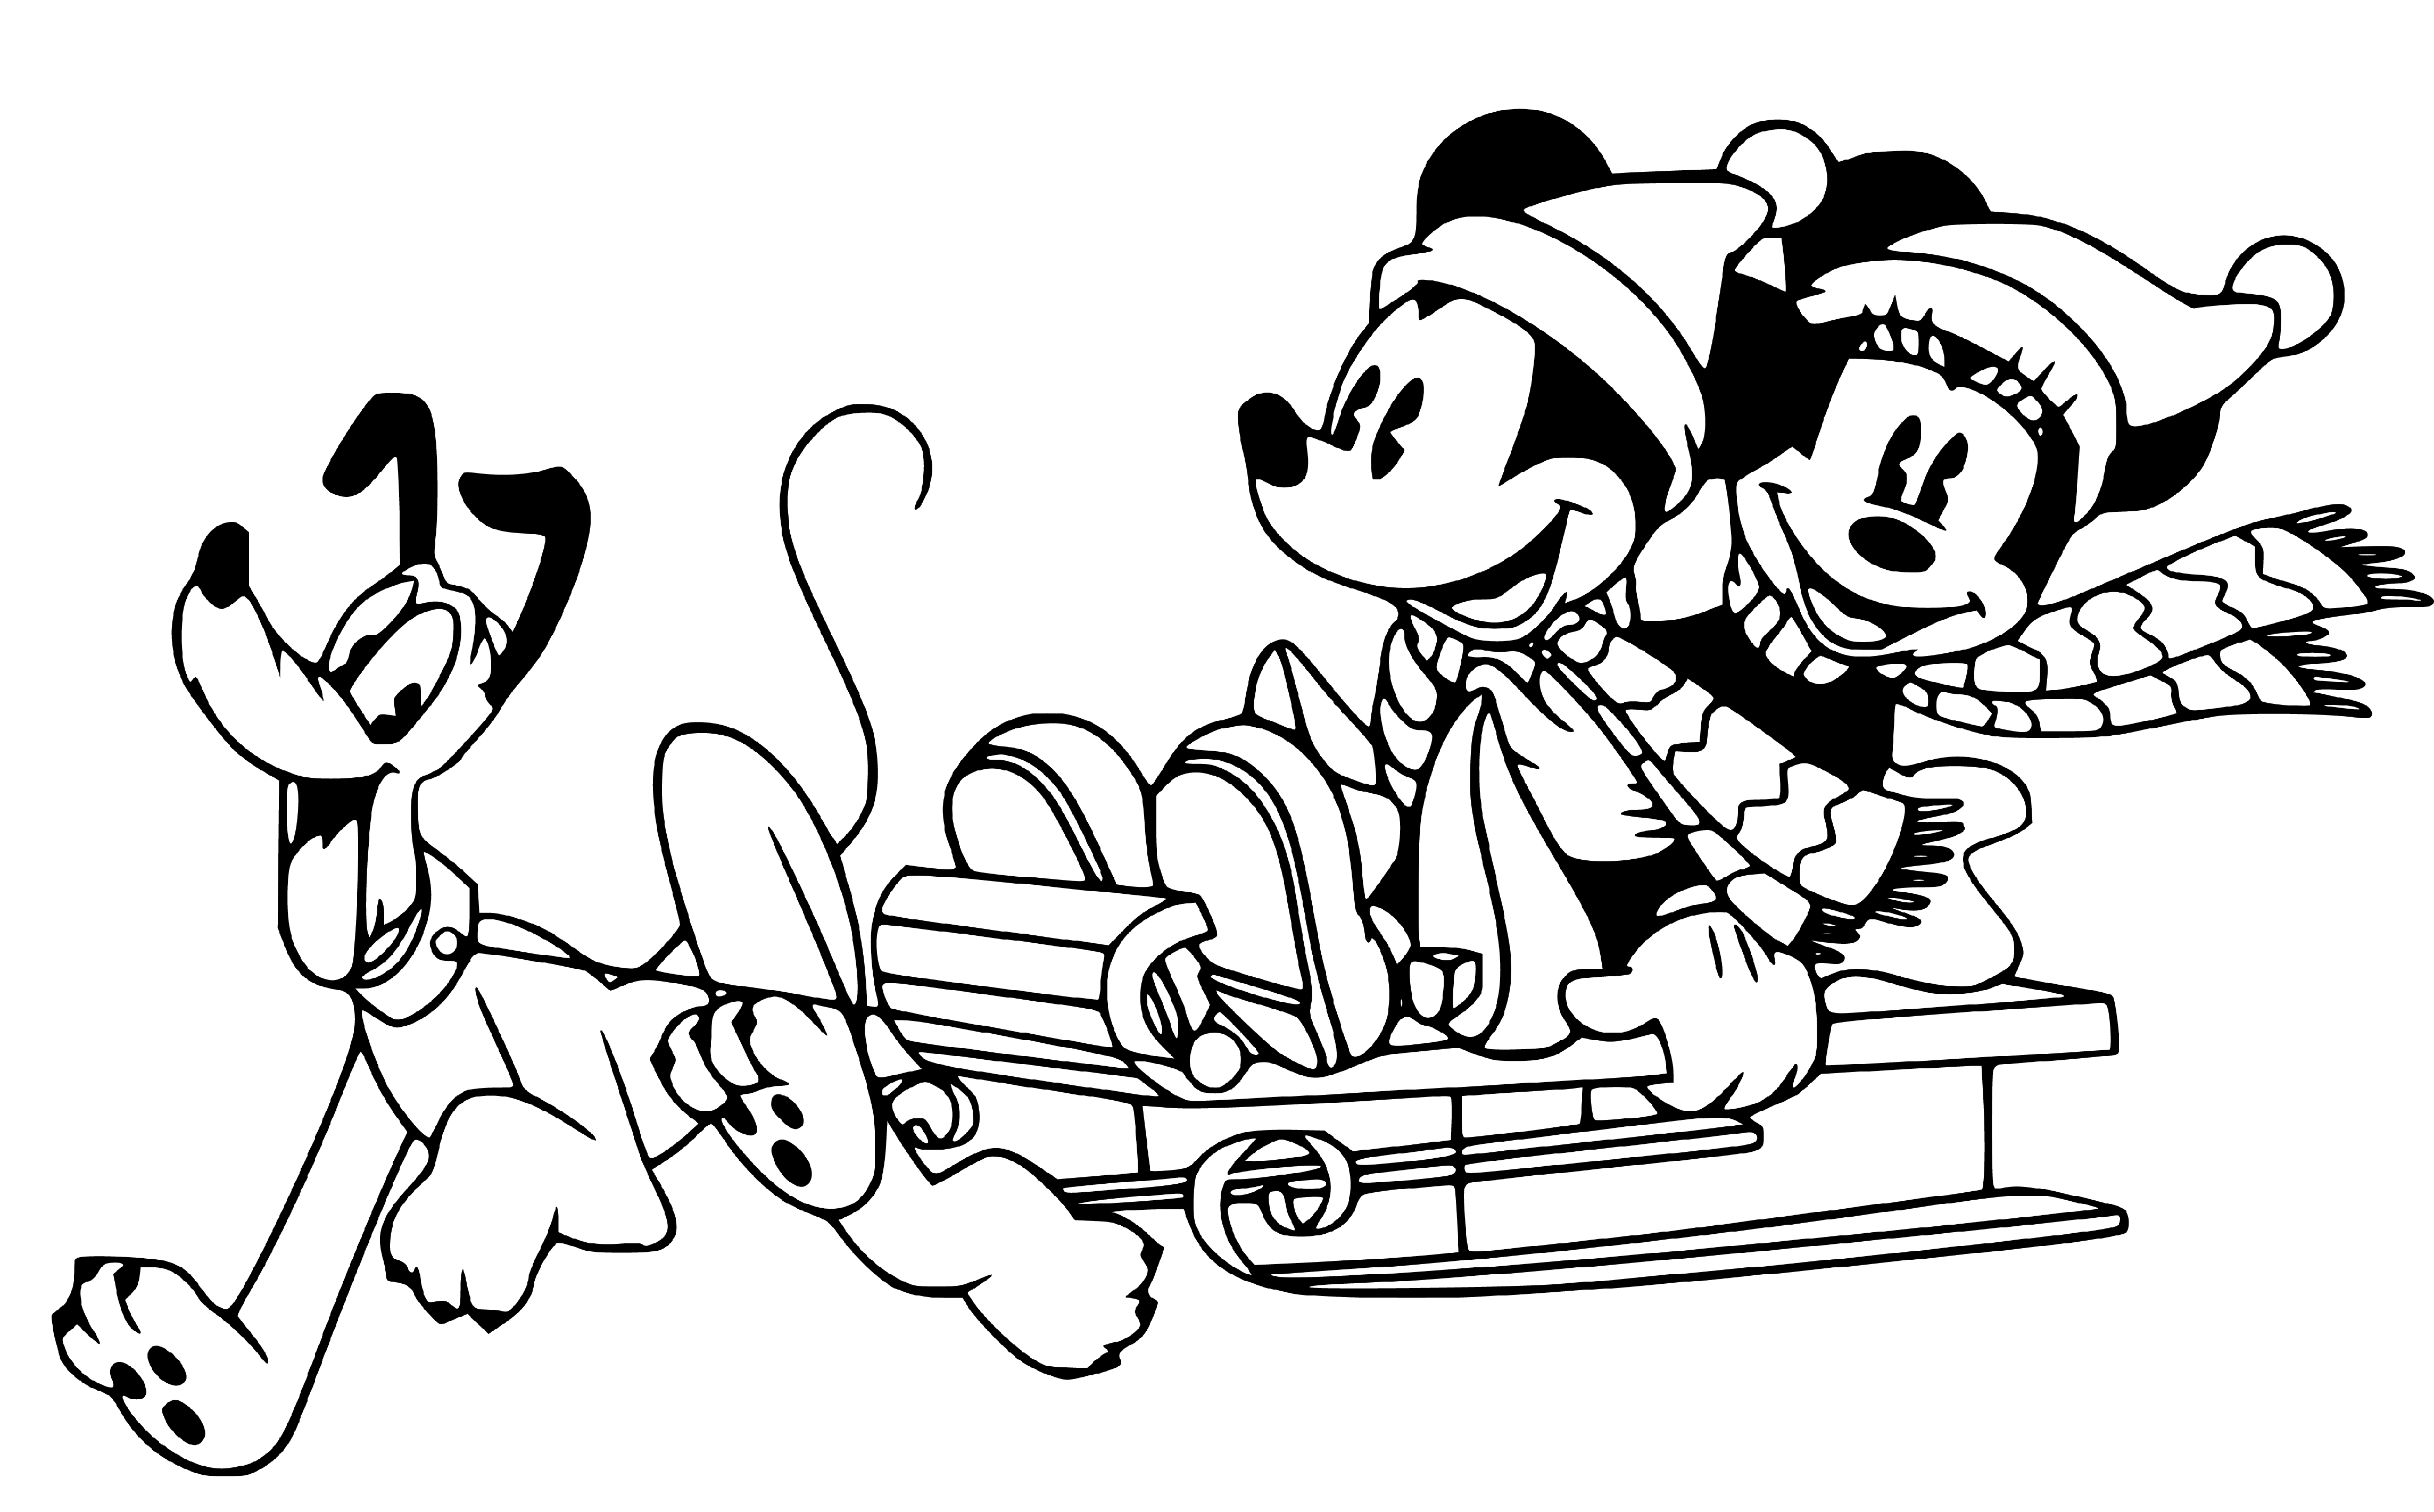 Printable Mickey Minnie and Pluto Christmas Coloring Page for kids.